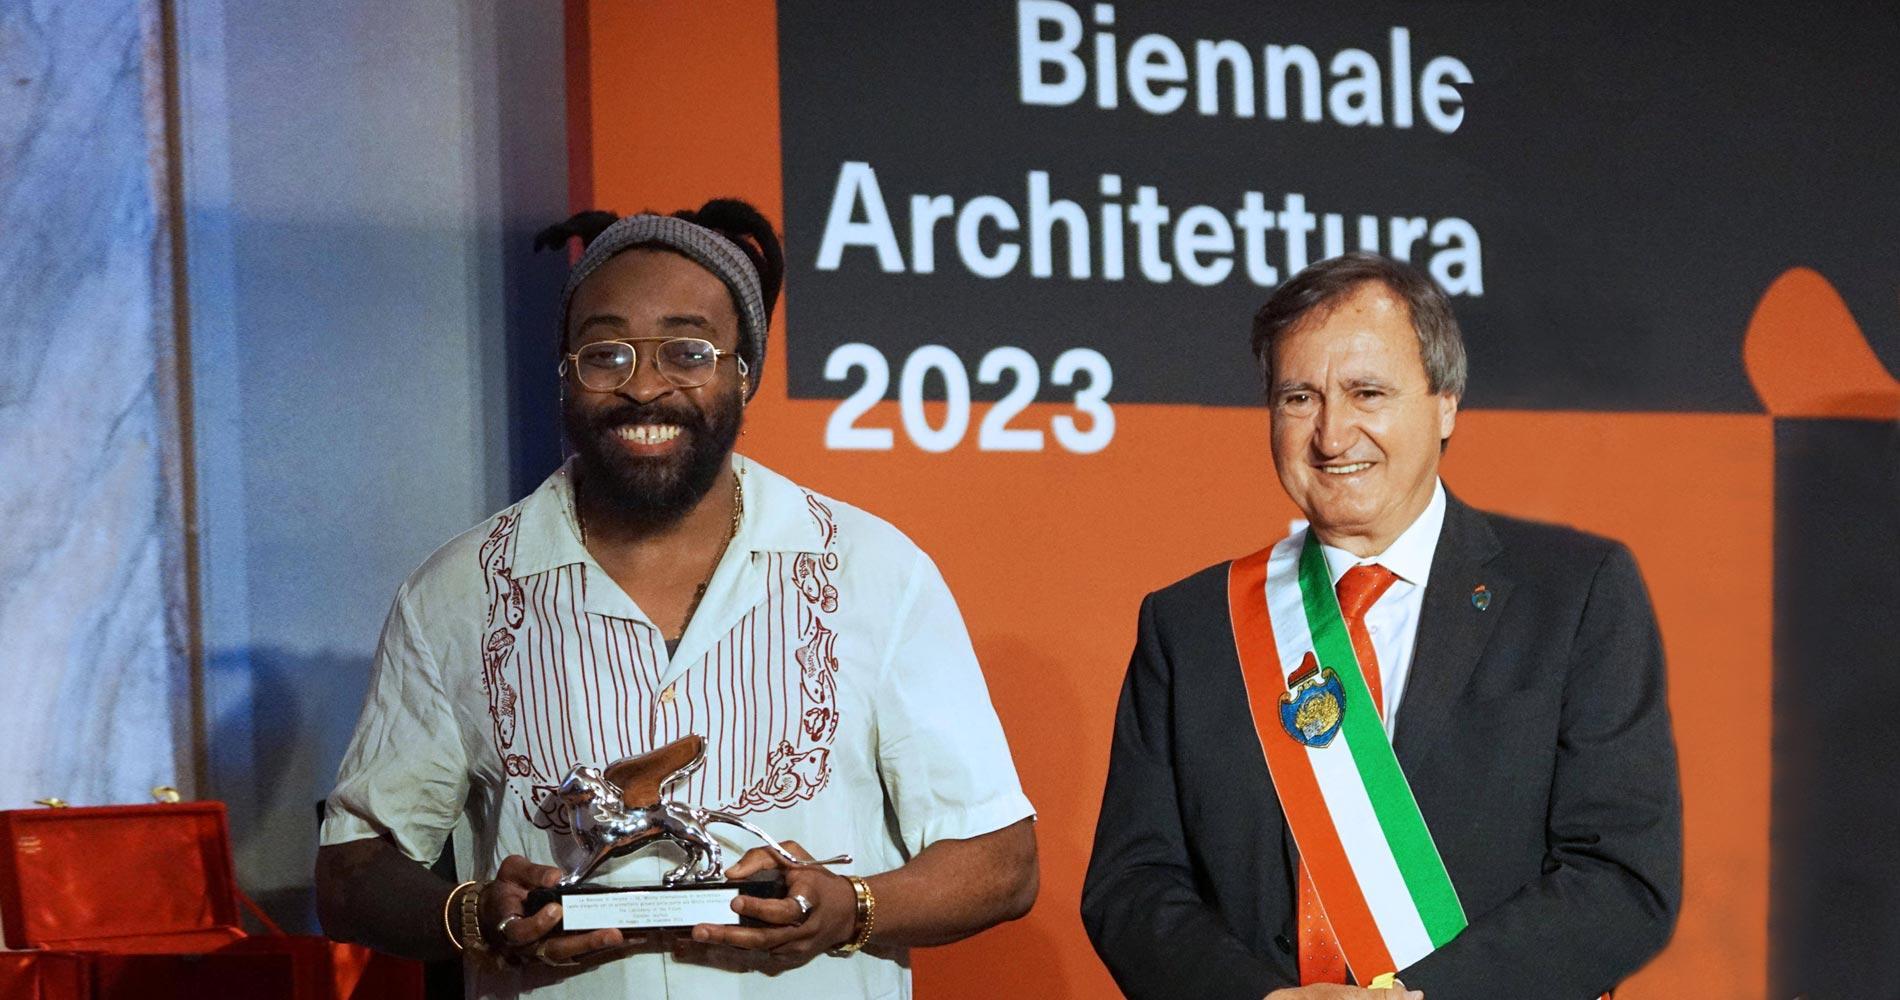 Biennale Architecture 2023: The Global African Laboratory of the Future